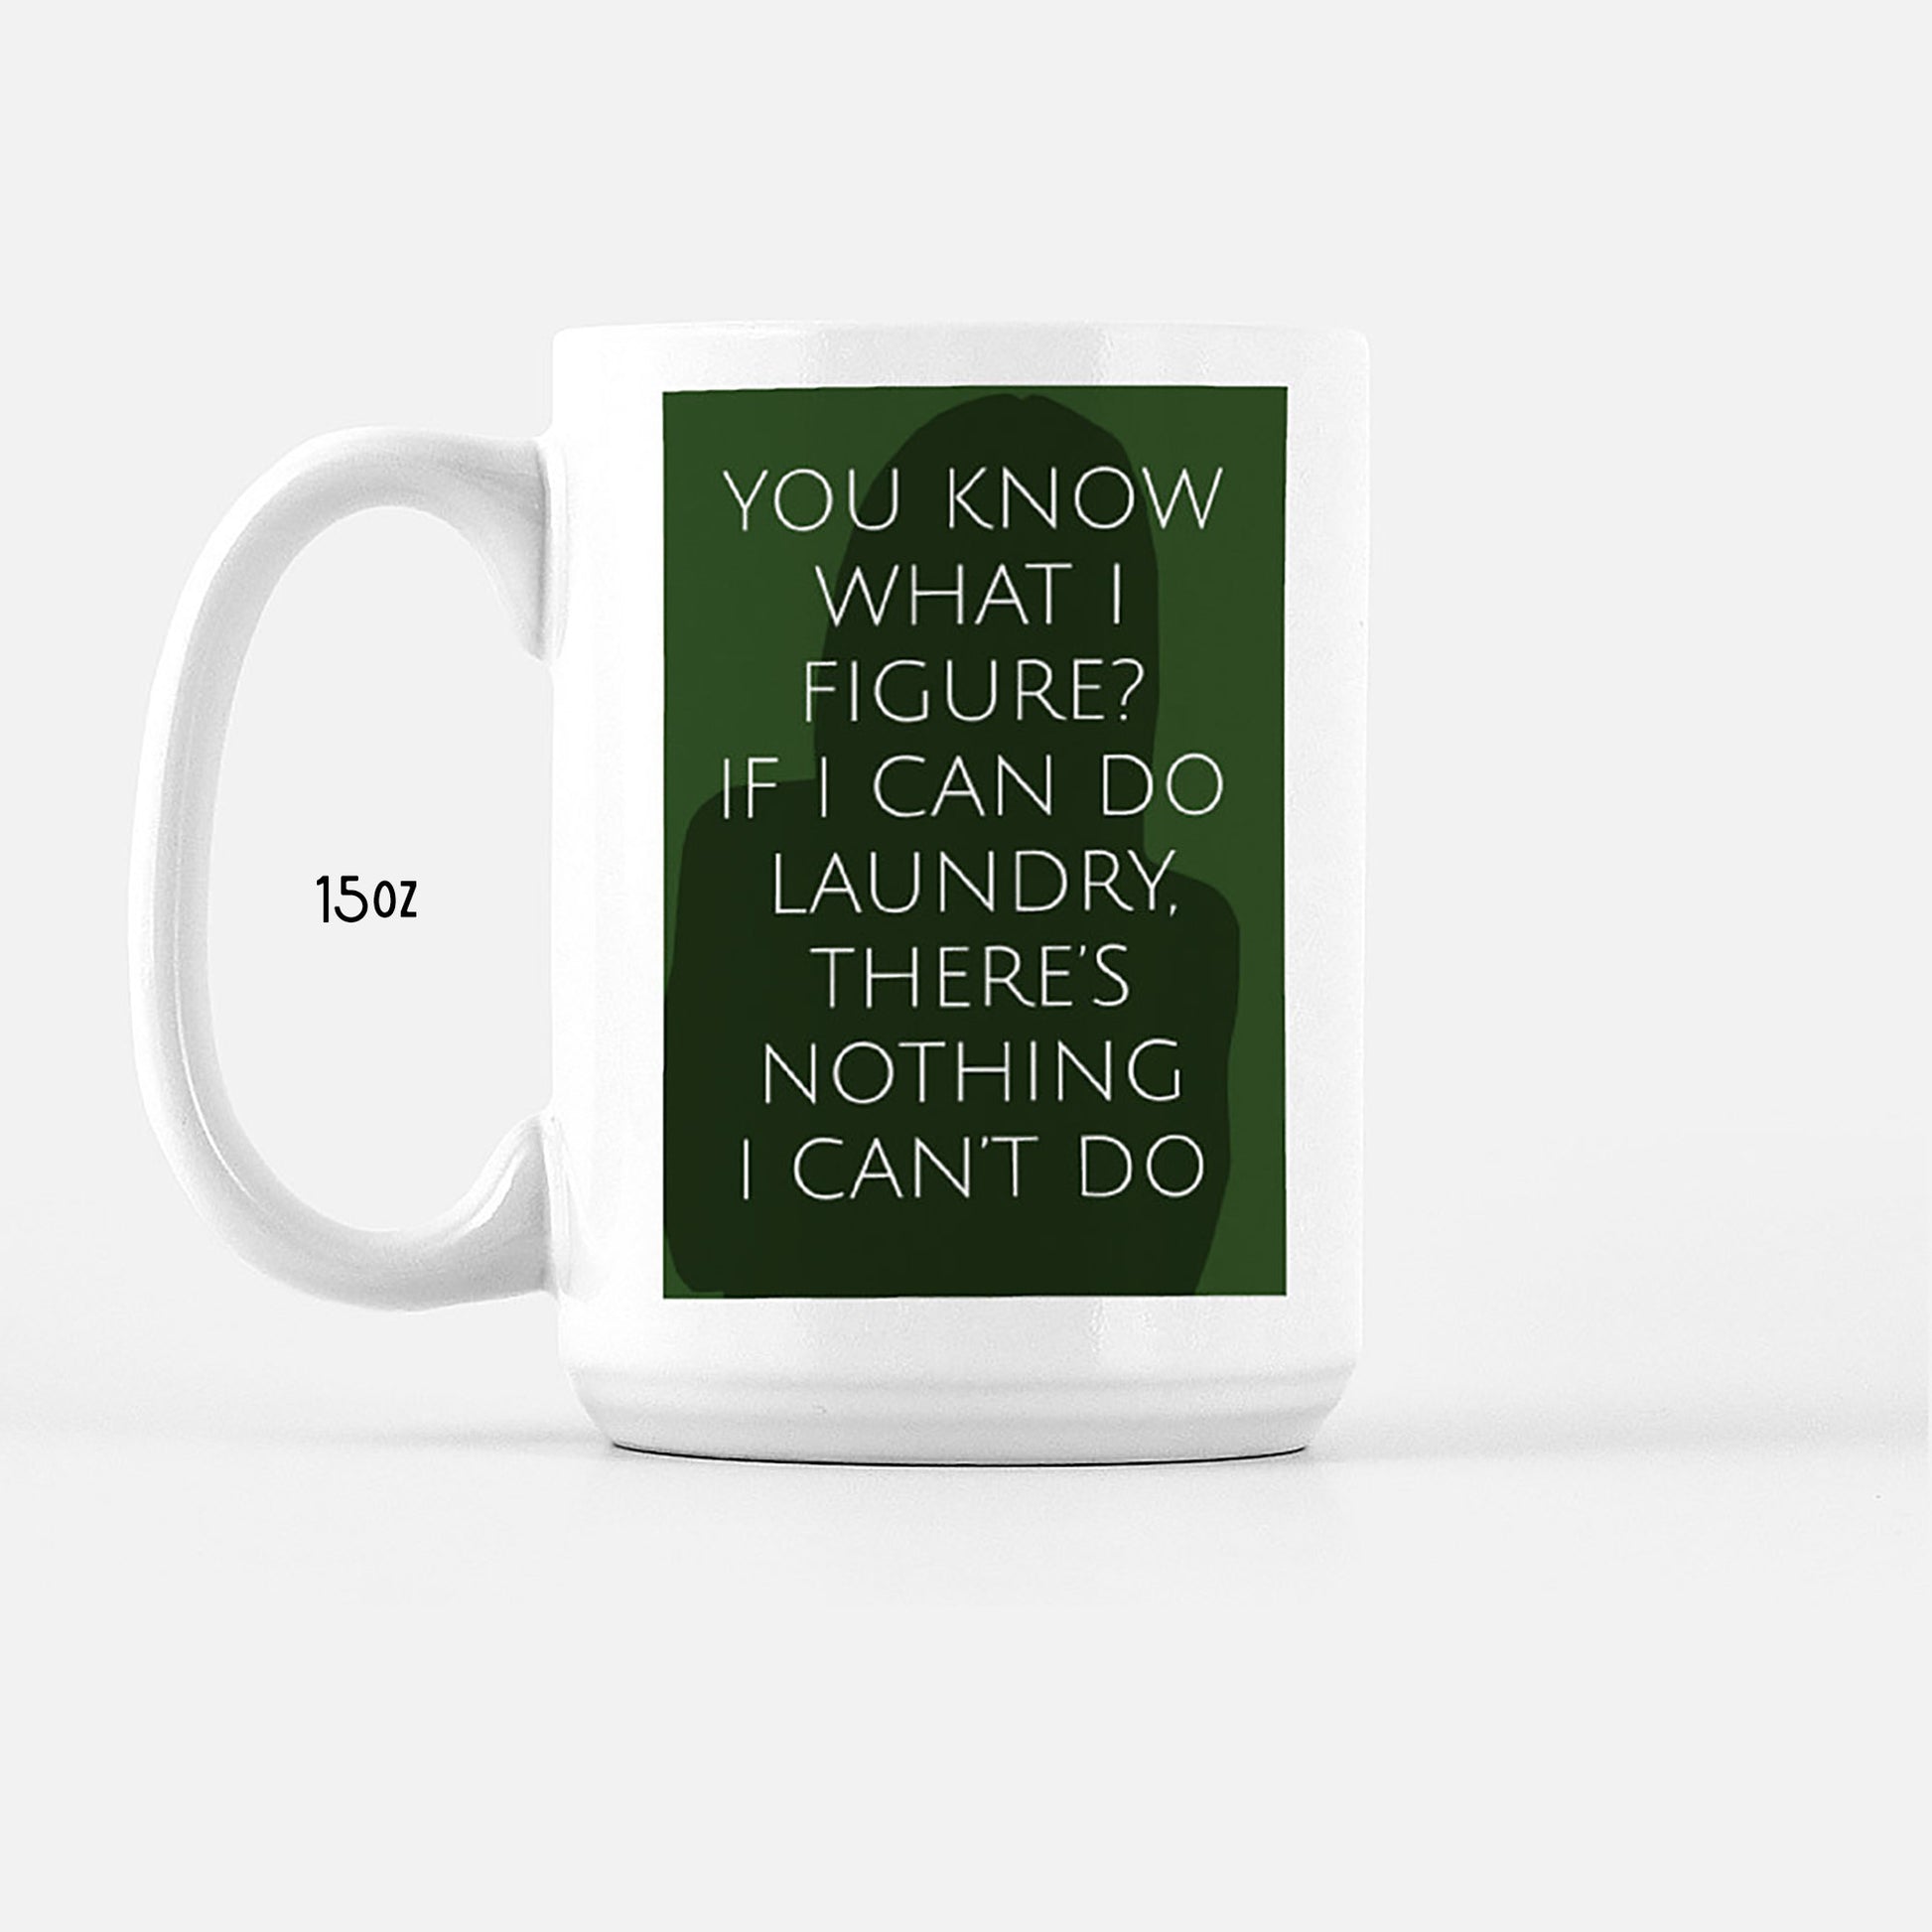 Rachel Green Friends Mug with Funny Quote